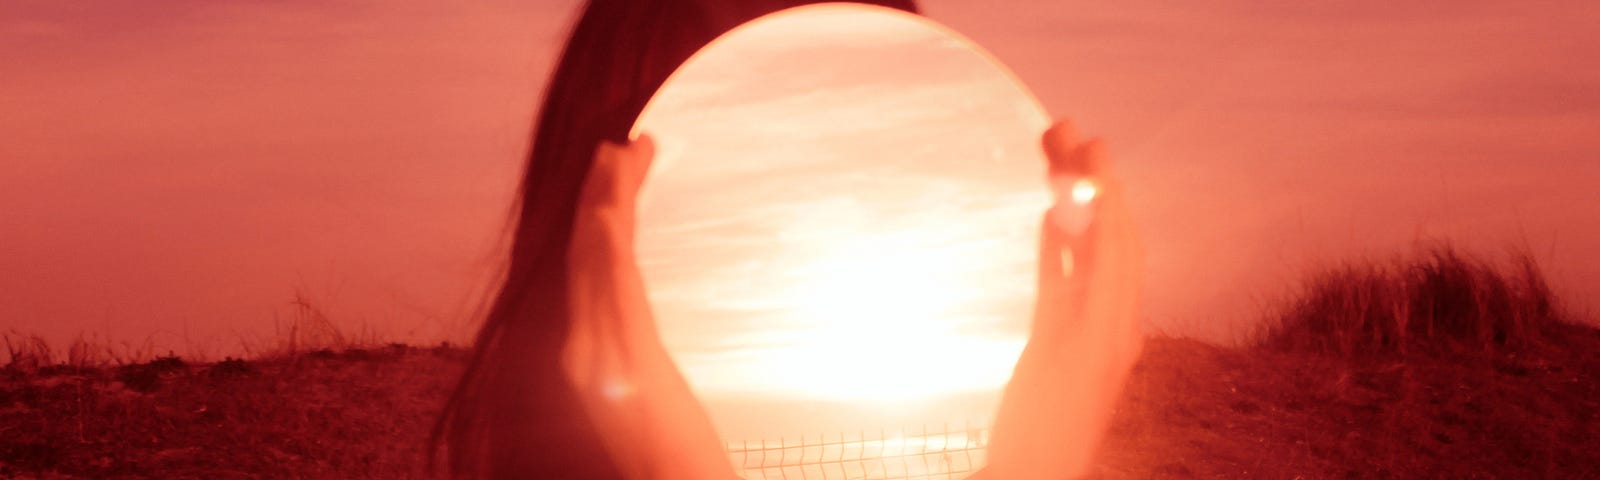 A woman holds a mirror over her face that reflects the bright light of the vivid red sunset.